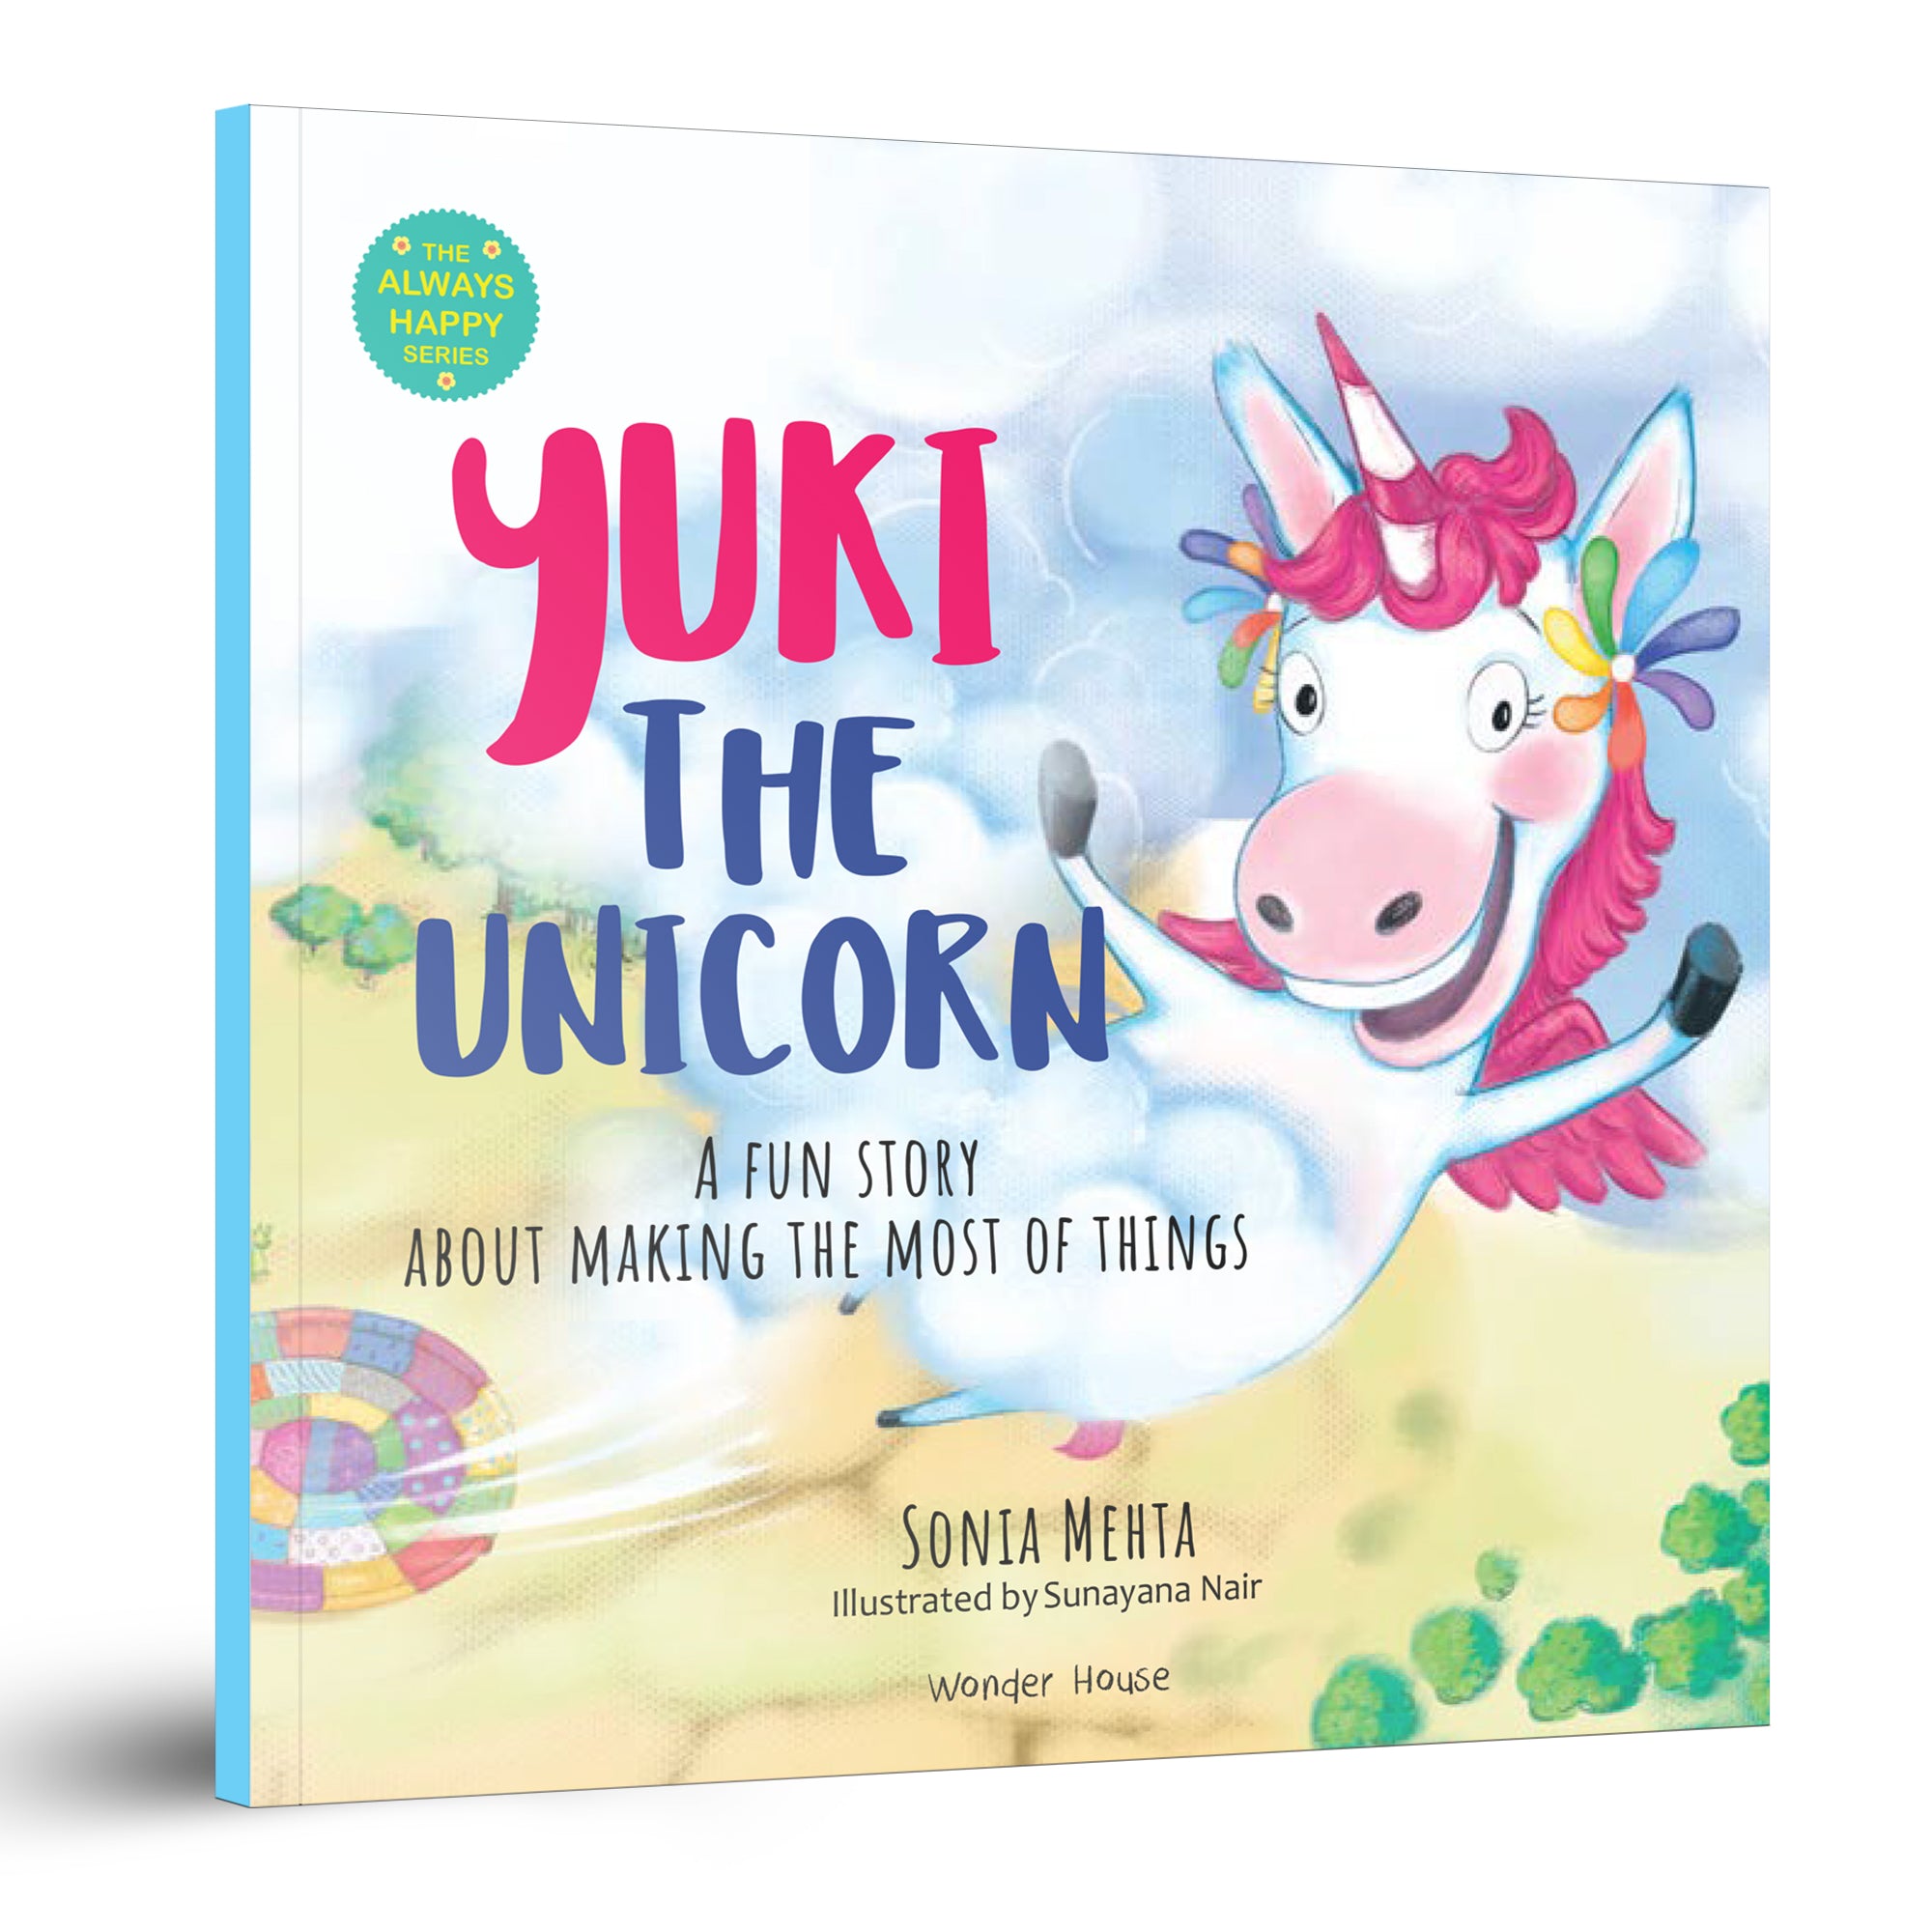 The Always Happy Series: Yuki the unicorn - A fun Story About Making The Most Of Things - Beautifully Illustrated Picture Book For Children